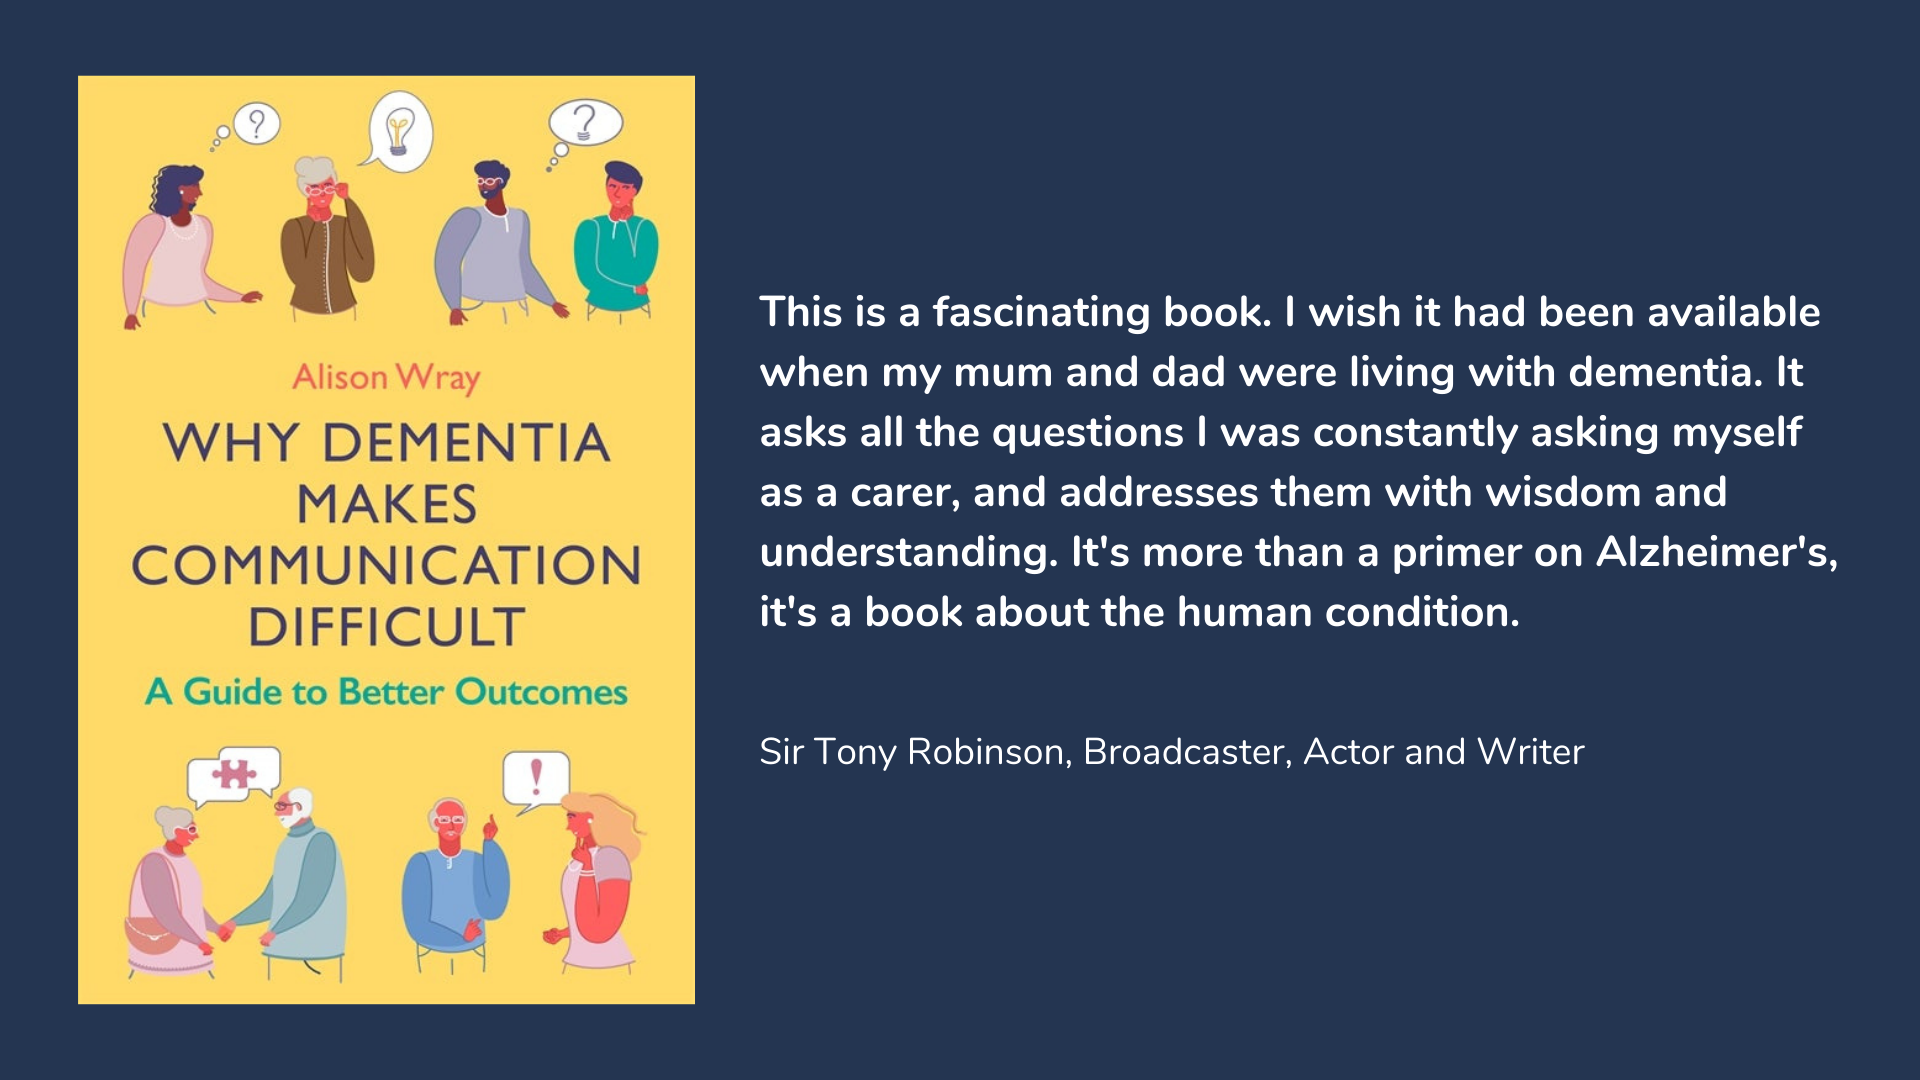 Why Dementia Makes Communication Difficult, book cover and description.